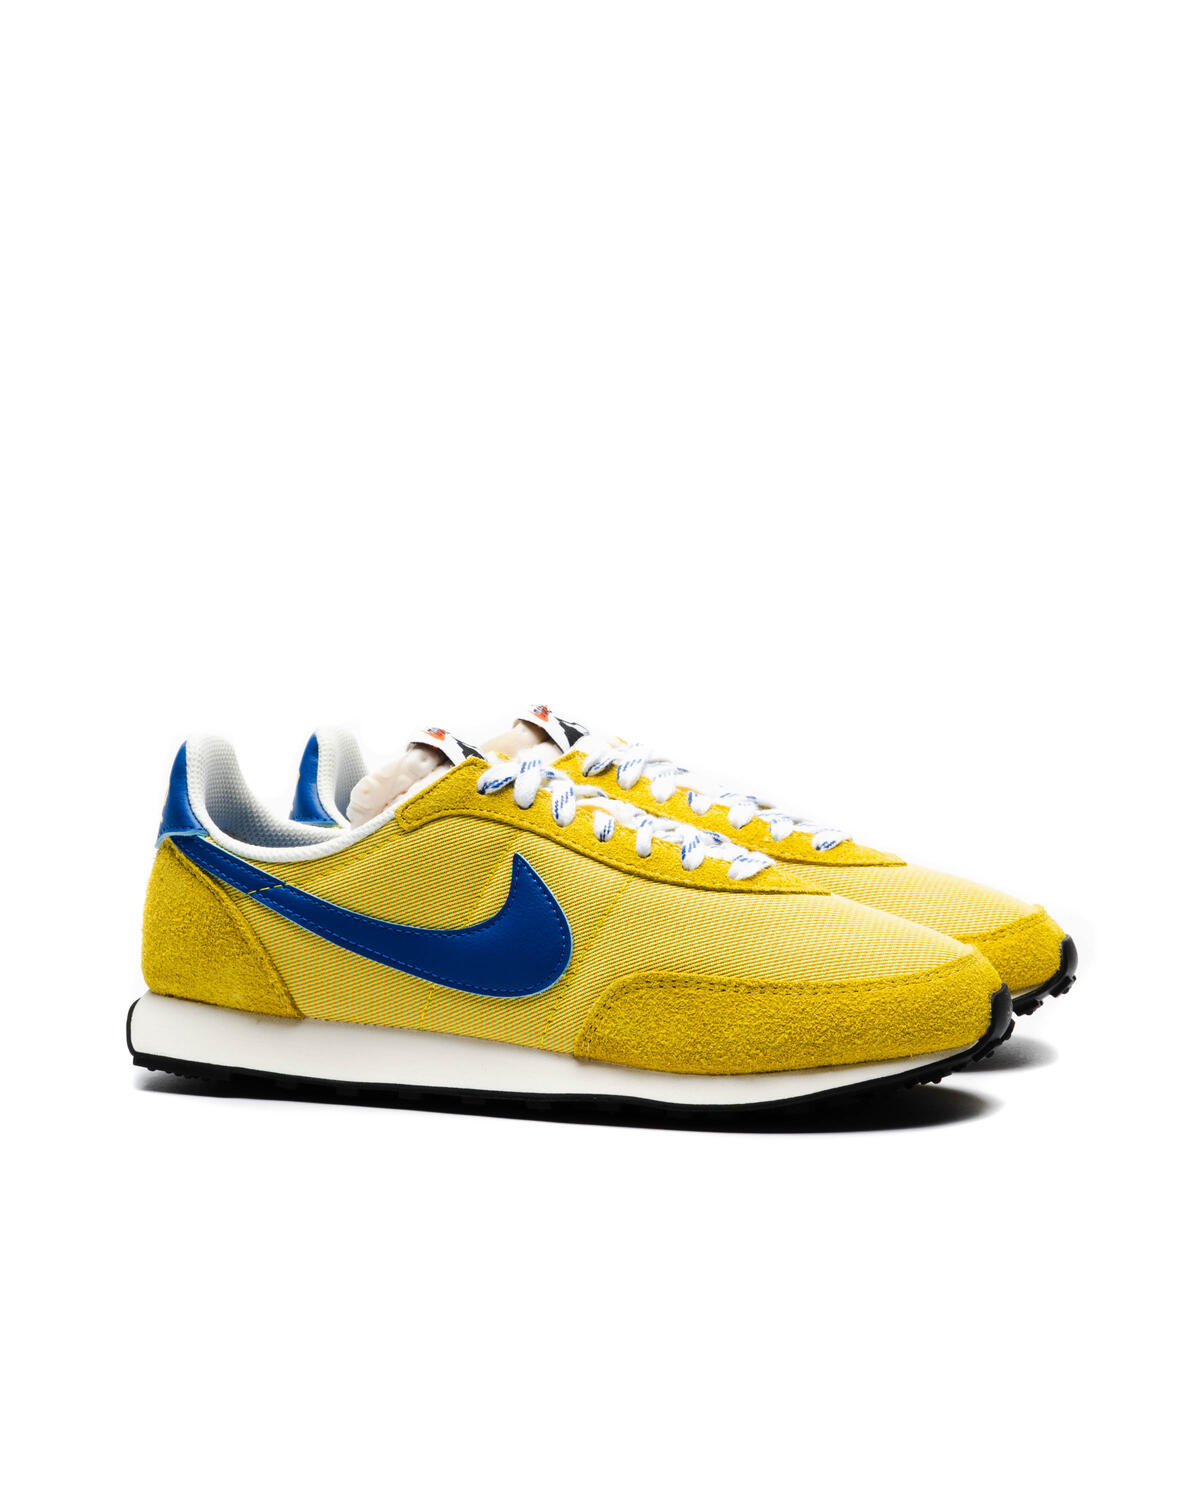 Nike WAFFLE TRAINER 2 SD | DC8865-700 | AFEW STORE